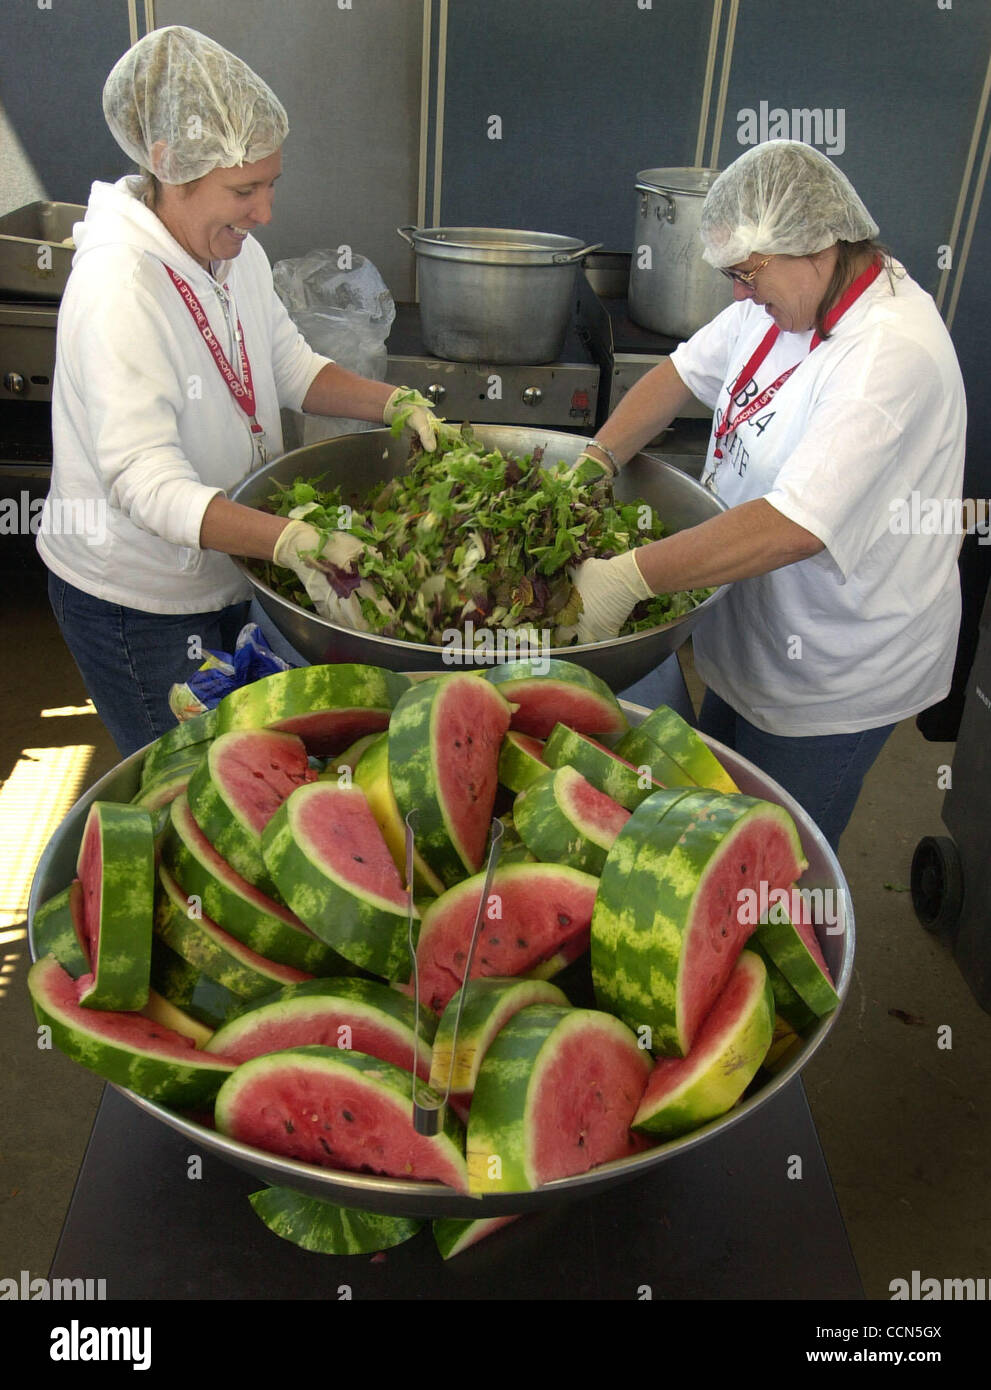 Lunch volunteers Christen Rodriguez of San Ramon, left, and Sue Beals of Hollister toss the mixed greens salad in preparation for the mid-day meal during East Bay Stand Down at Camp Parks, Saturday, August 14, 2004, in Dublin, Calif. Homeless veterans also had chili, barbecued chicken, bread and wat Stock Photo